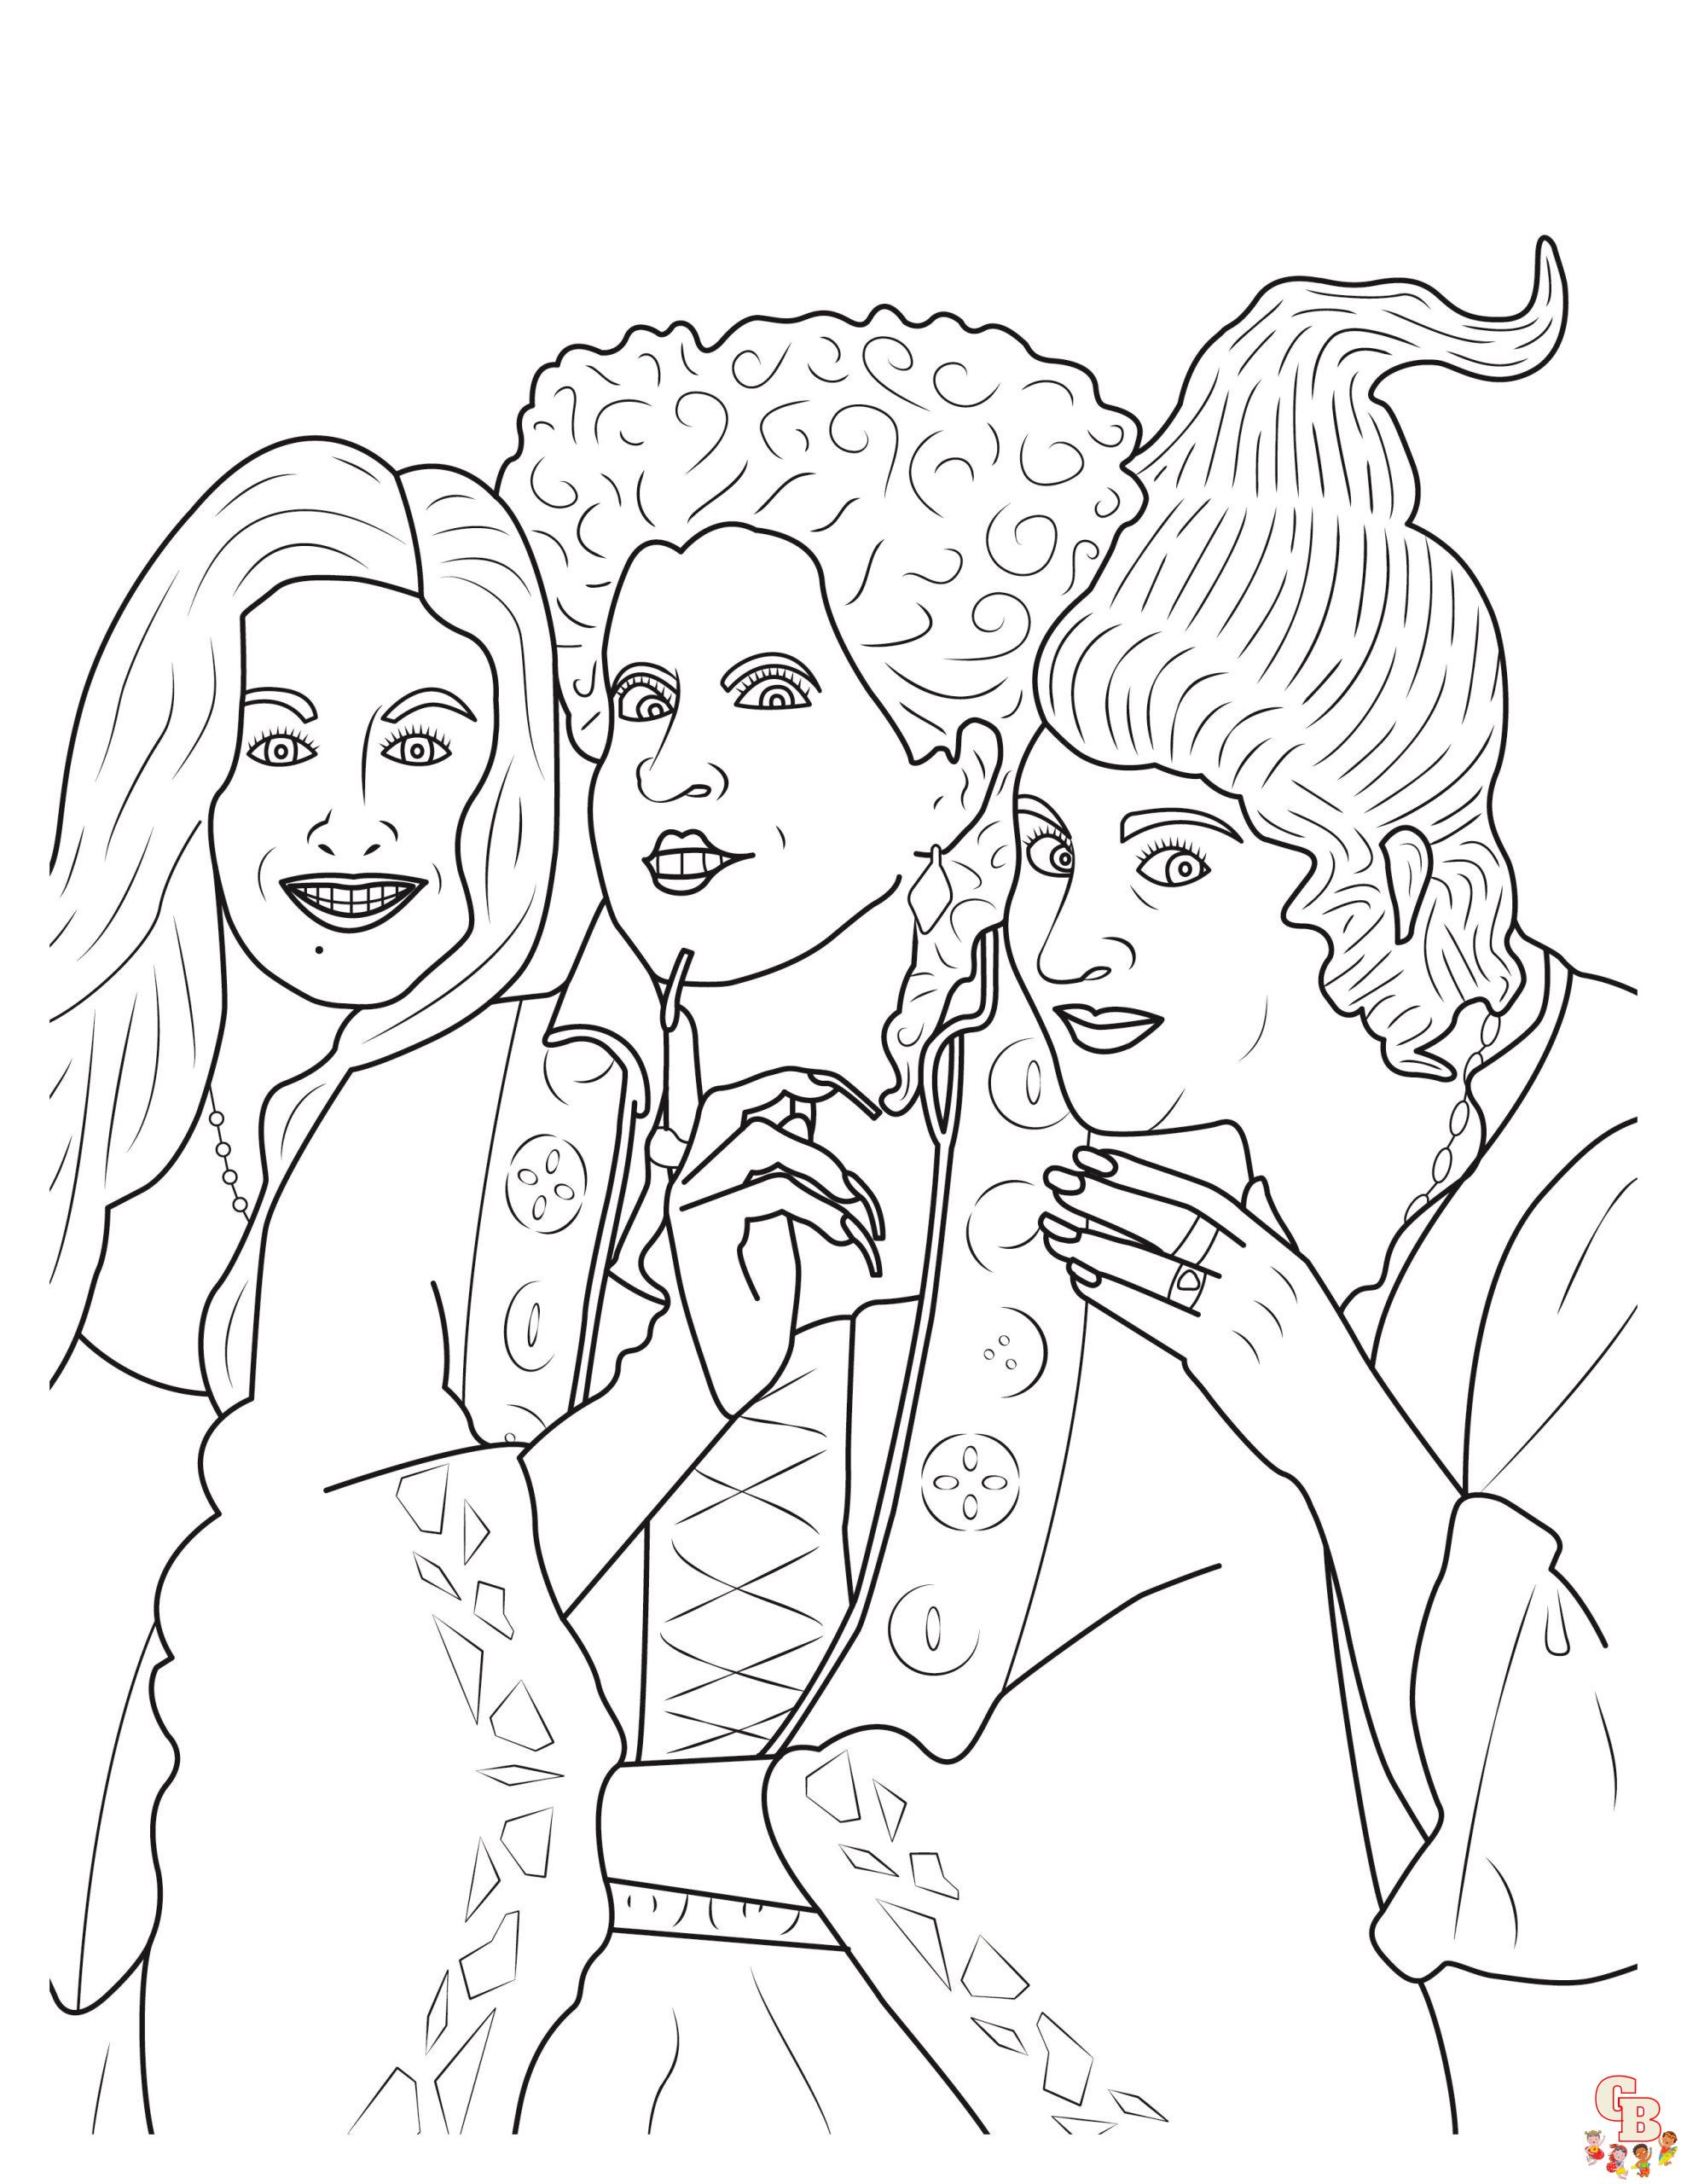 Enjoy the spooky fun with addams family coloring pages